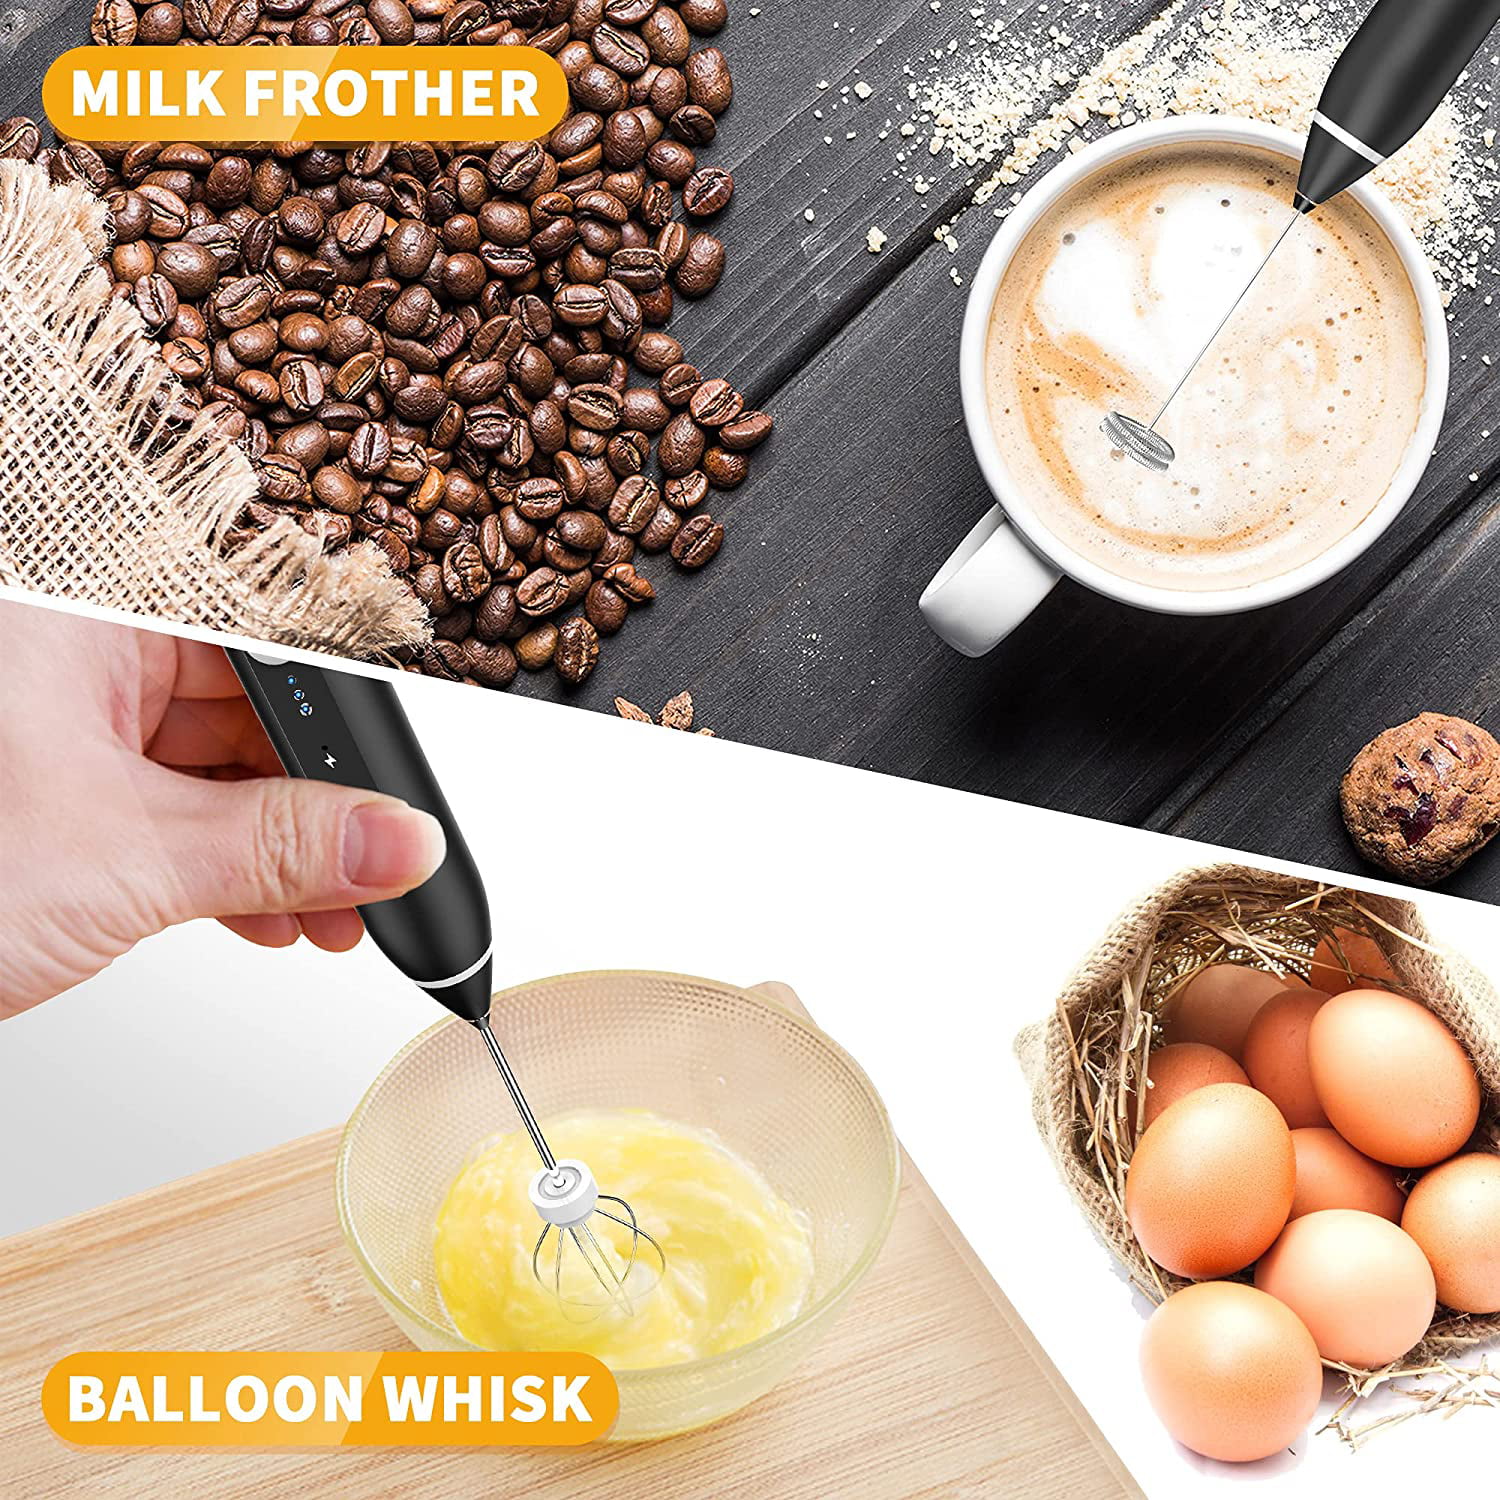 yucanucax 5-Speed Milk Frother Handheld Foam Maker USB Rechargeable Coffee Frother with 3 Whisks Adjustable Mini Blender for Cappuccino, Latte, Coffee